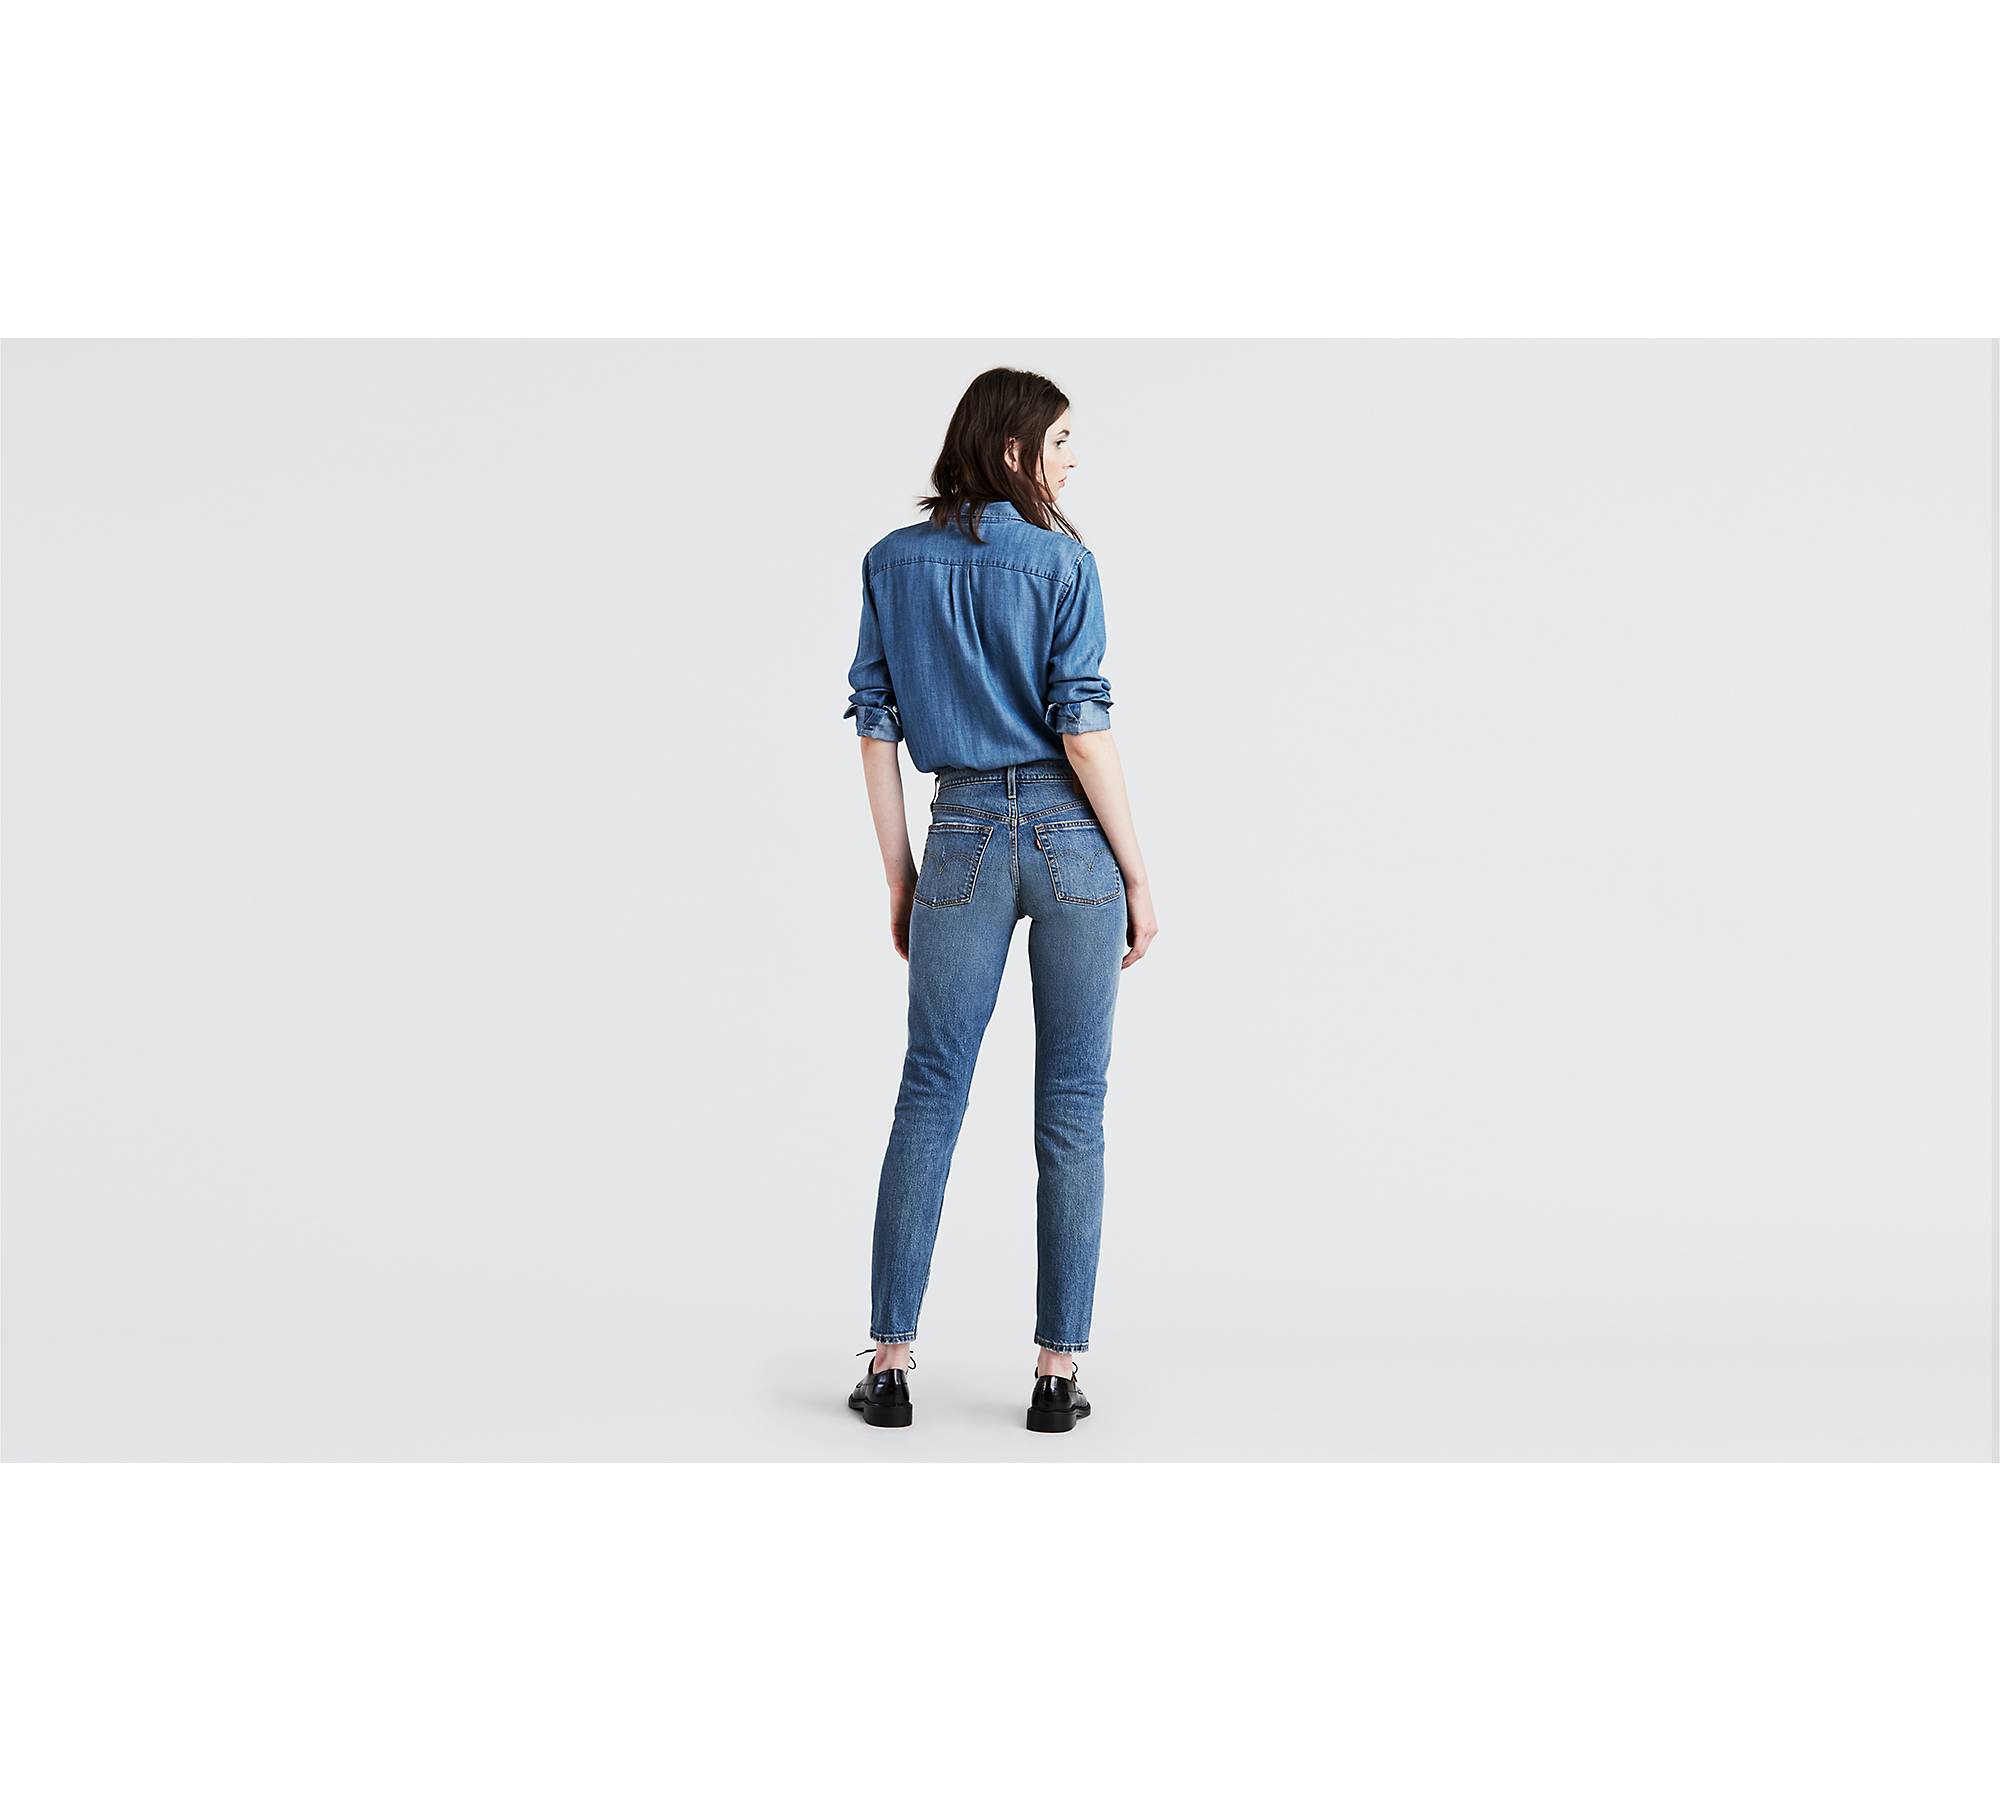 Button Your Fly Skinny Women's Jeans - Medium Wash | Levi's® US